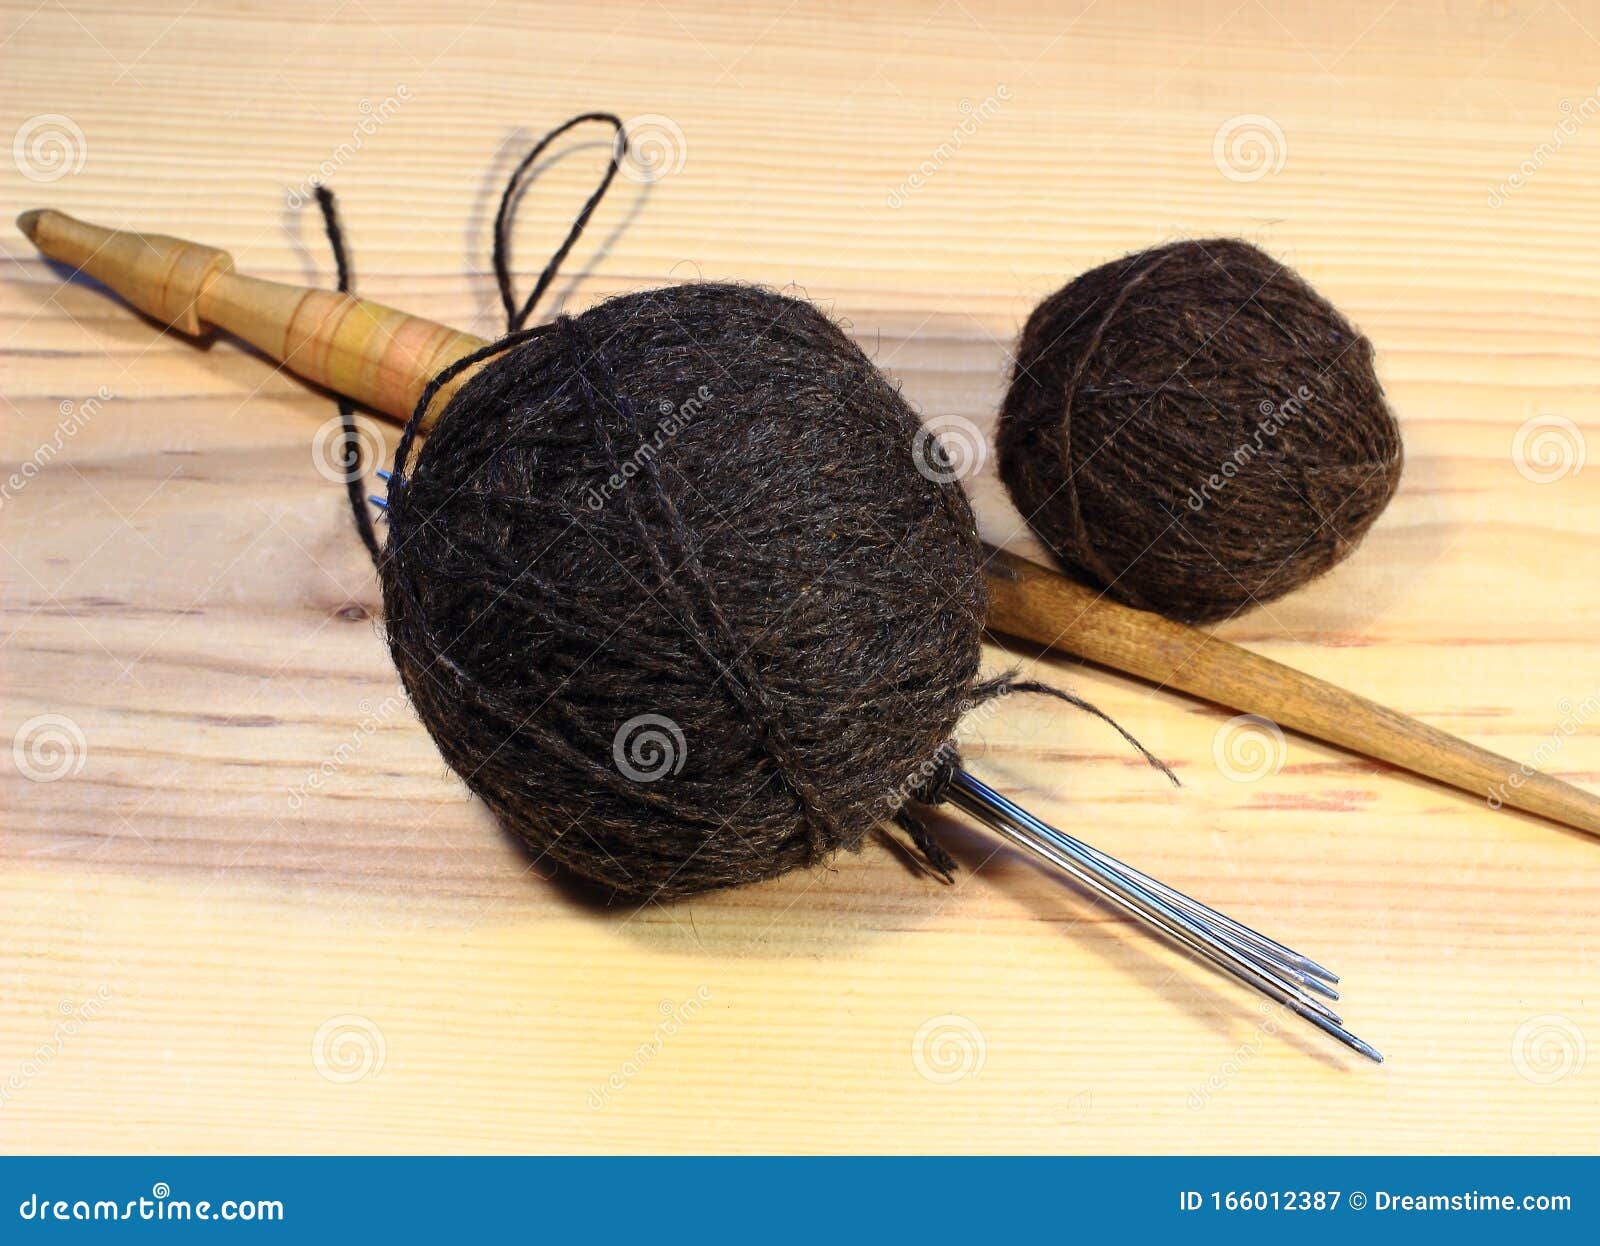 Two Balls of Yarn, a Spindle and Knitting Needles Stock Image - Image of  plate, basket: 166012387